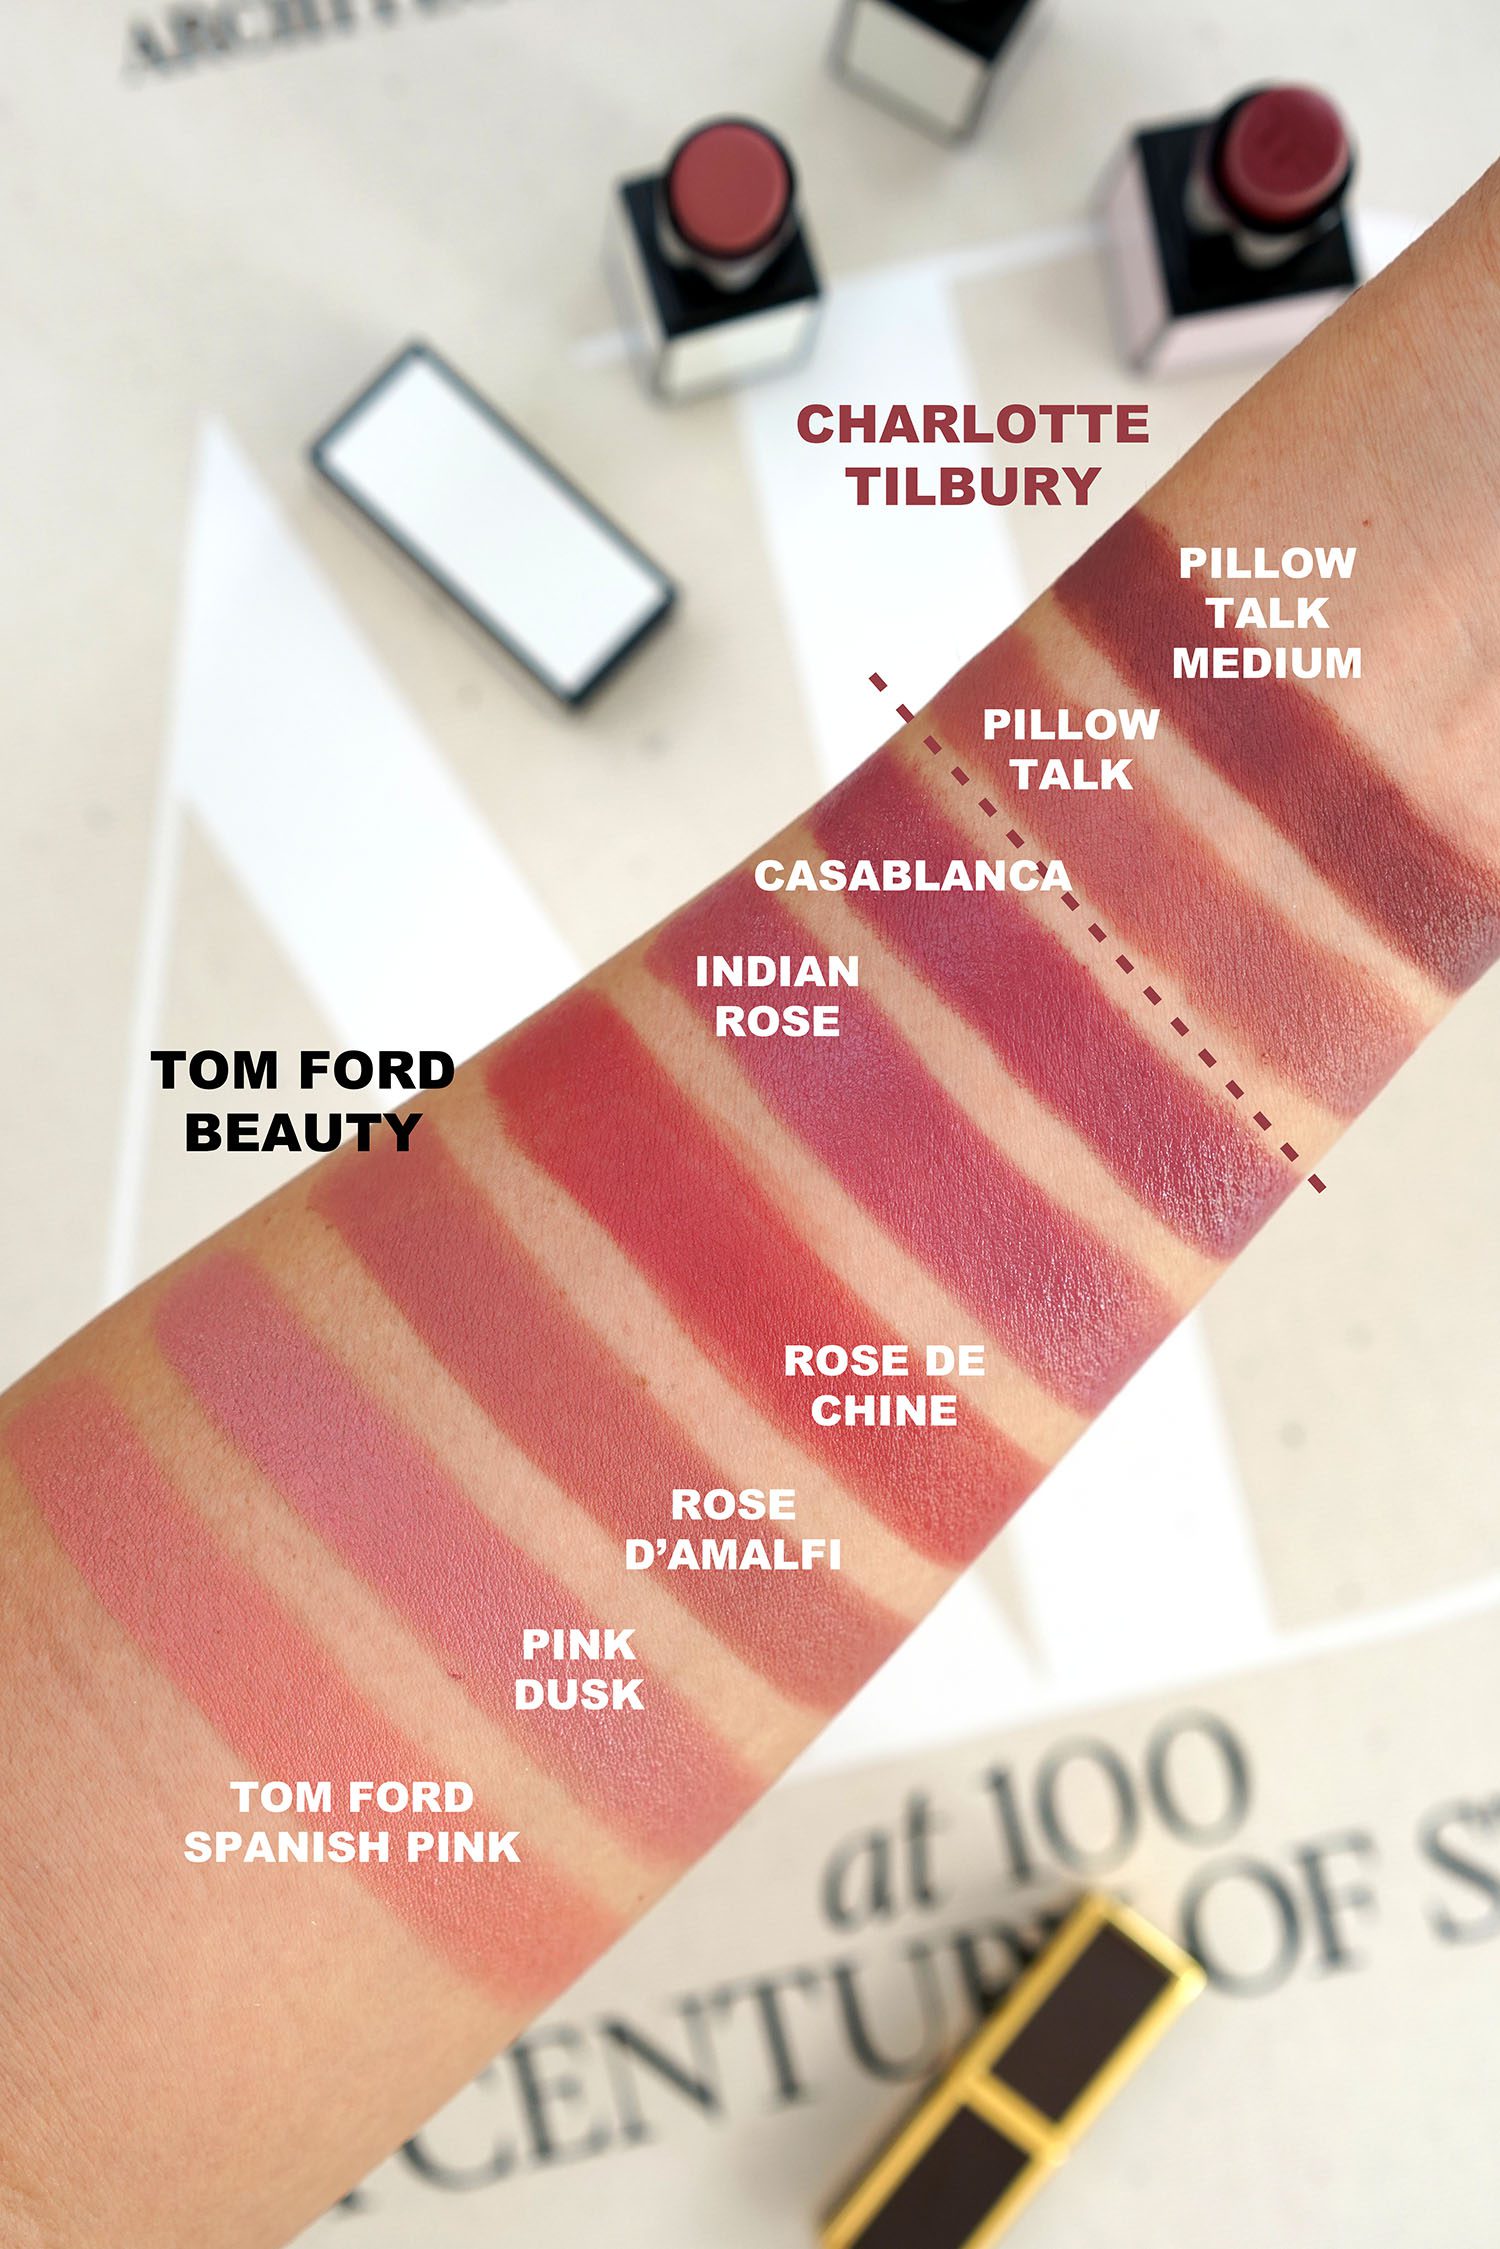 New Tom Ford Beauty at Nordstrom for Spring - The Beauty Look Book